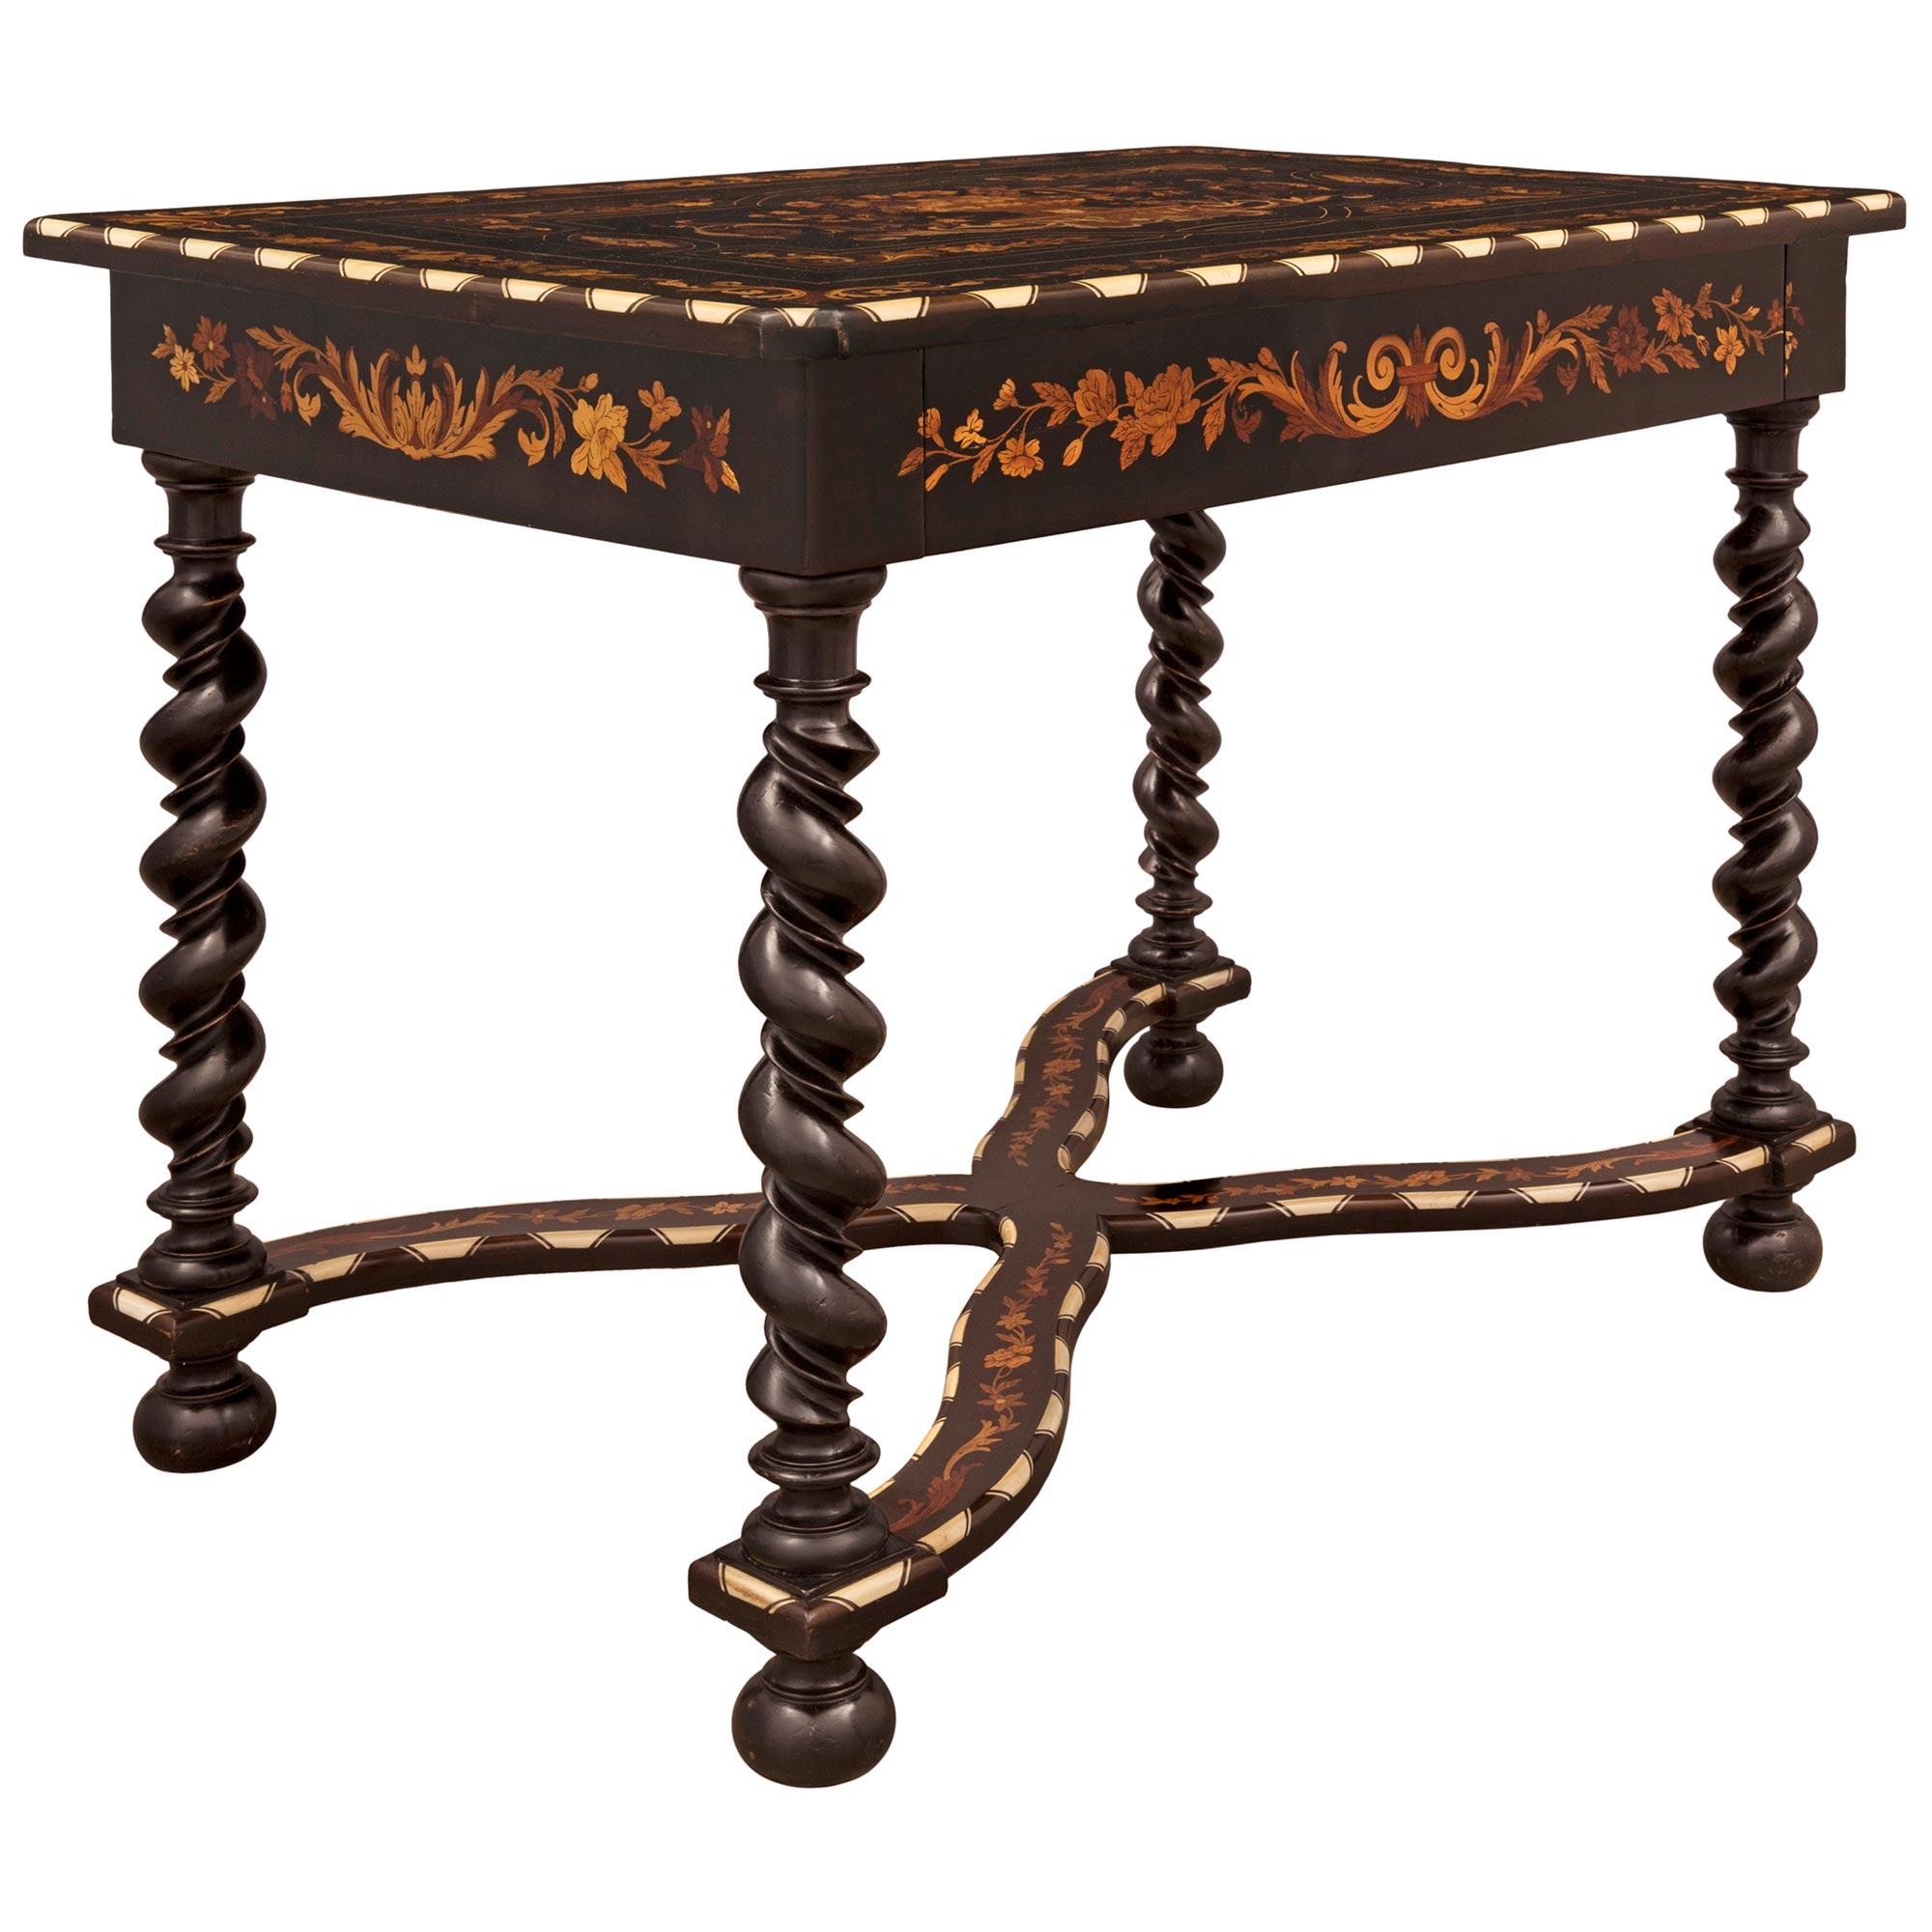 Italian 19th Century Ebony, Bone and Exotic Wood Center Table / Desk In Good Condition For Sale In West Palm Beach, FL